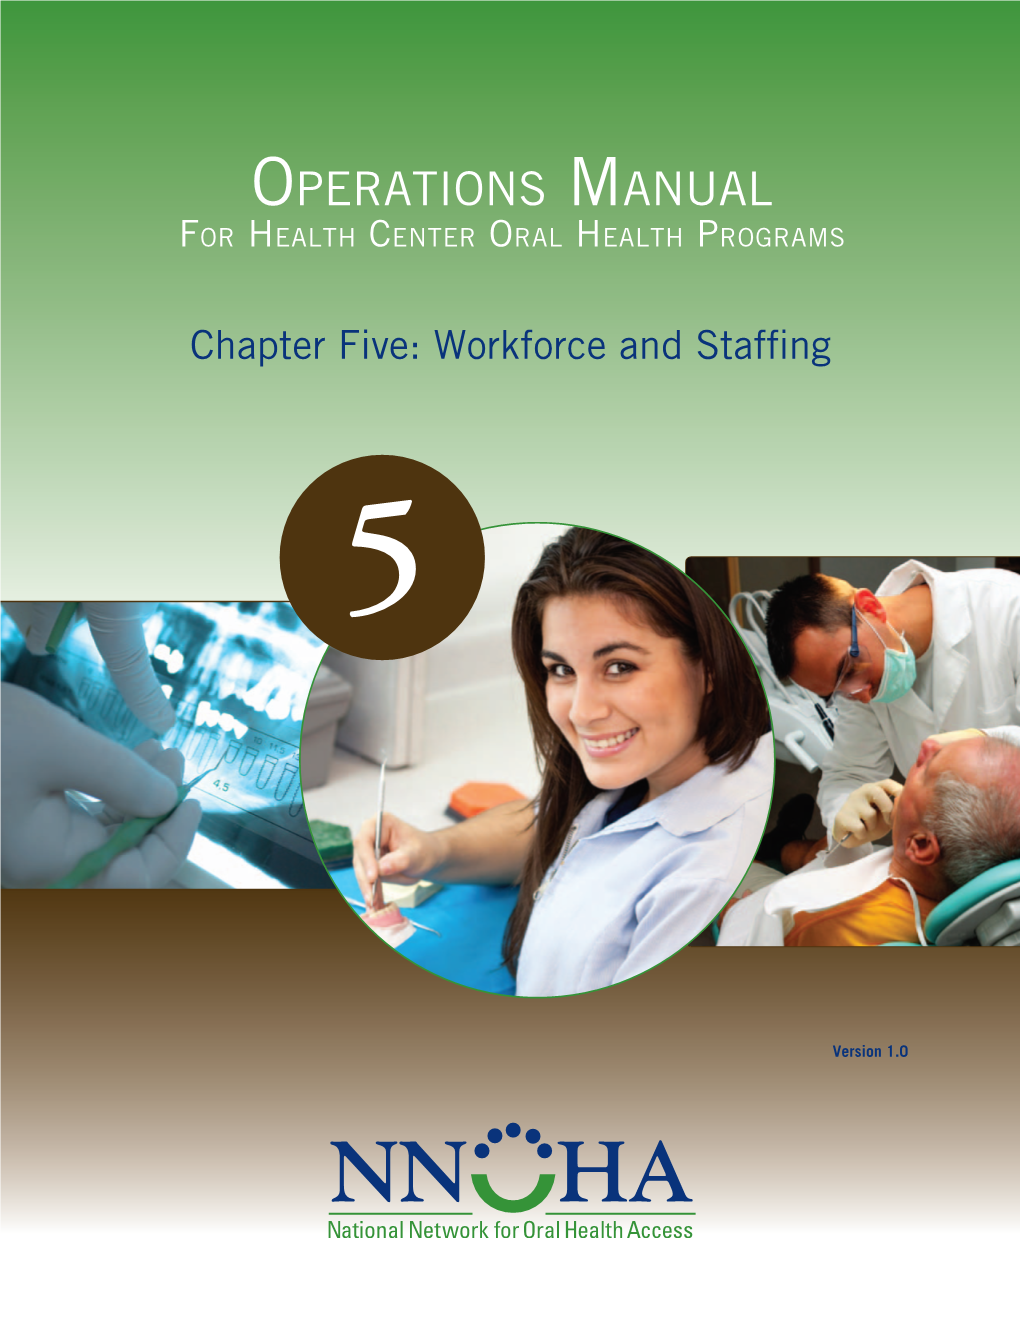 Chapter Five: Workforce and Staffing 5 Operations Manual for Health Center Oral Health Programs Chapter Five: Workforce and Staffing